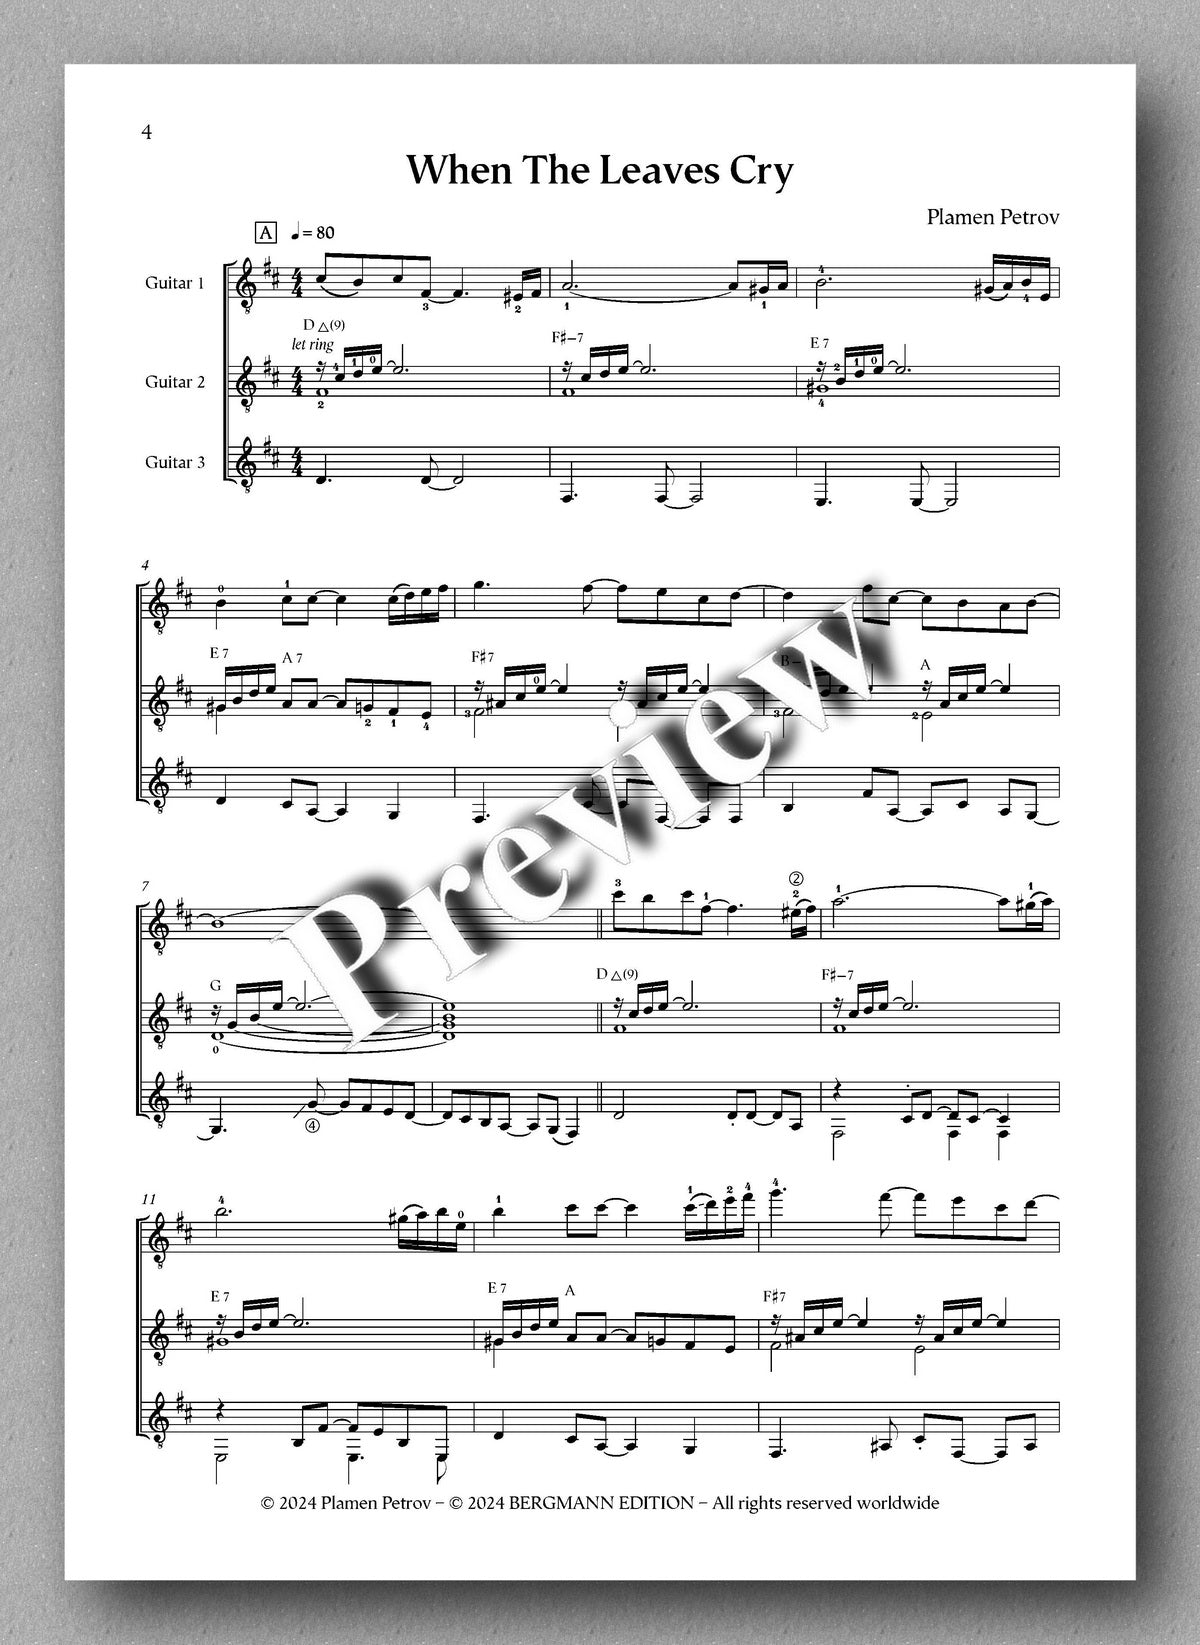 Plamen Petrov, When the Leaves Cry - preview of the music score 1